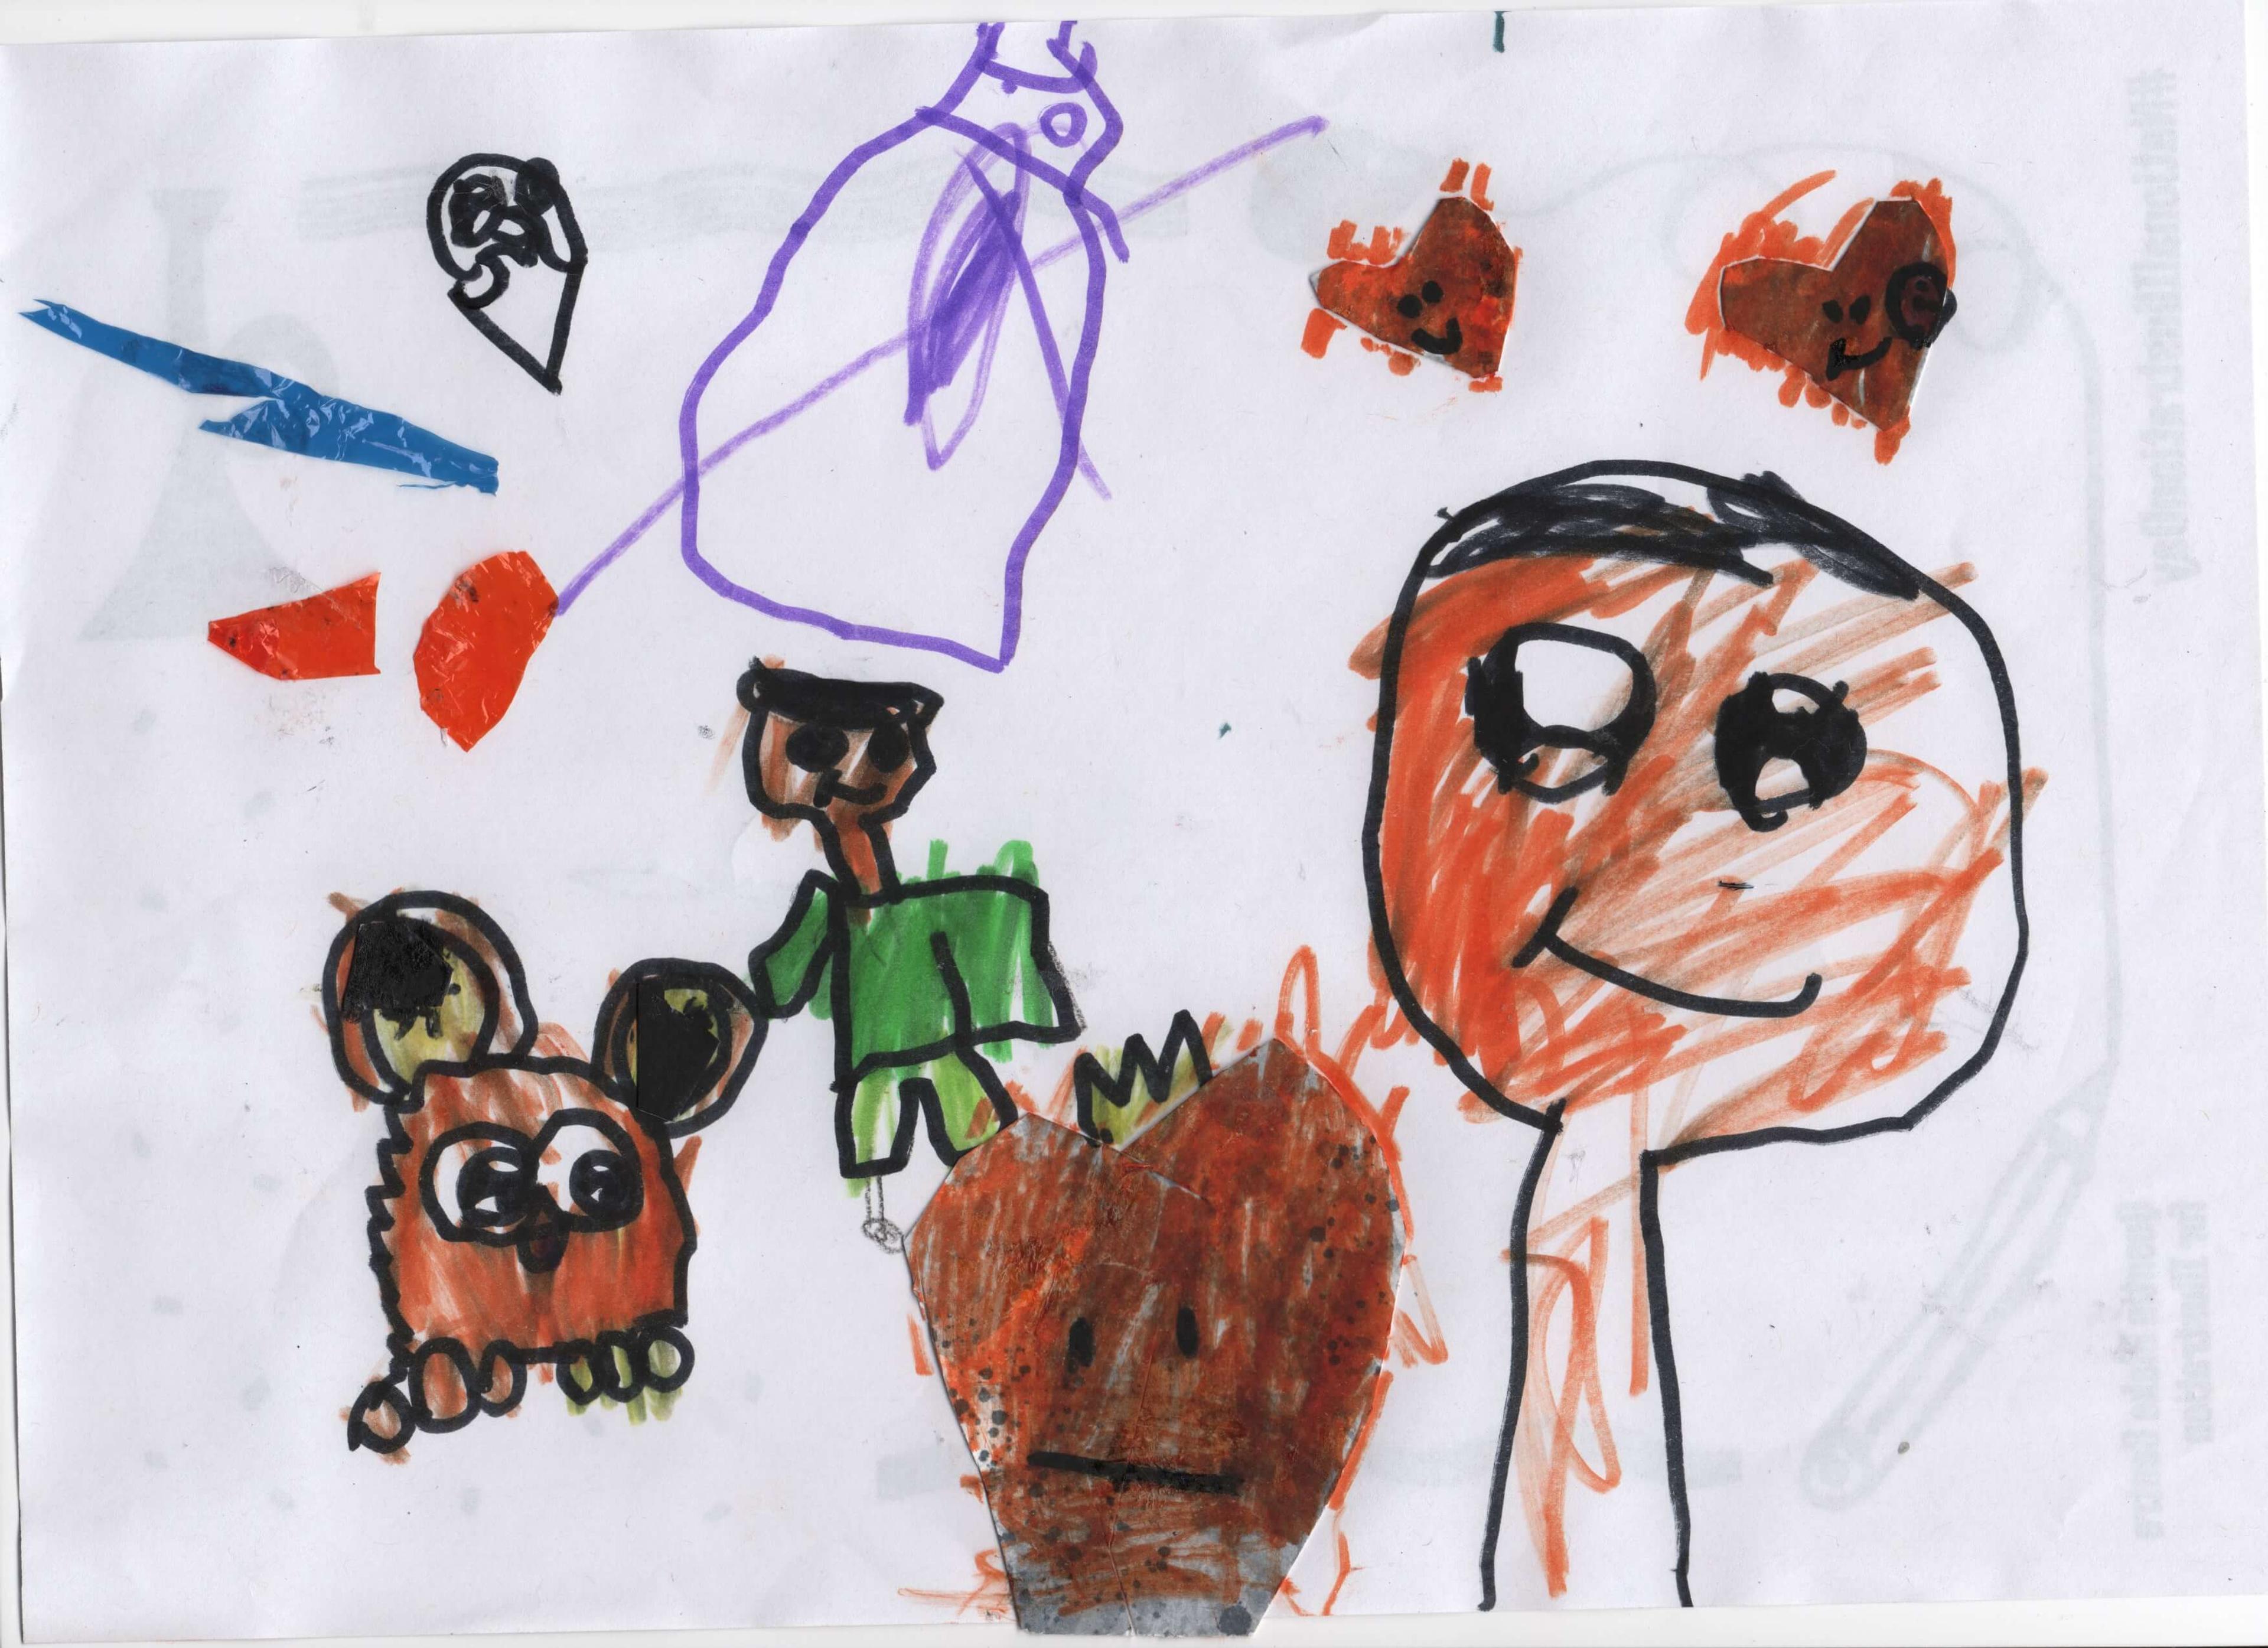 A variety of drawings with bold outlines including a child, a heart wearing a crown and a small animal, perhaps a mouse